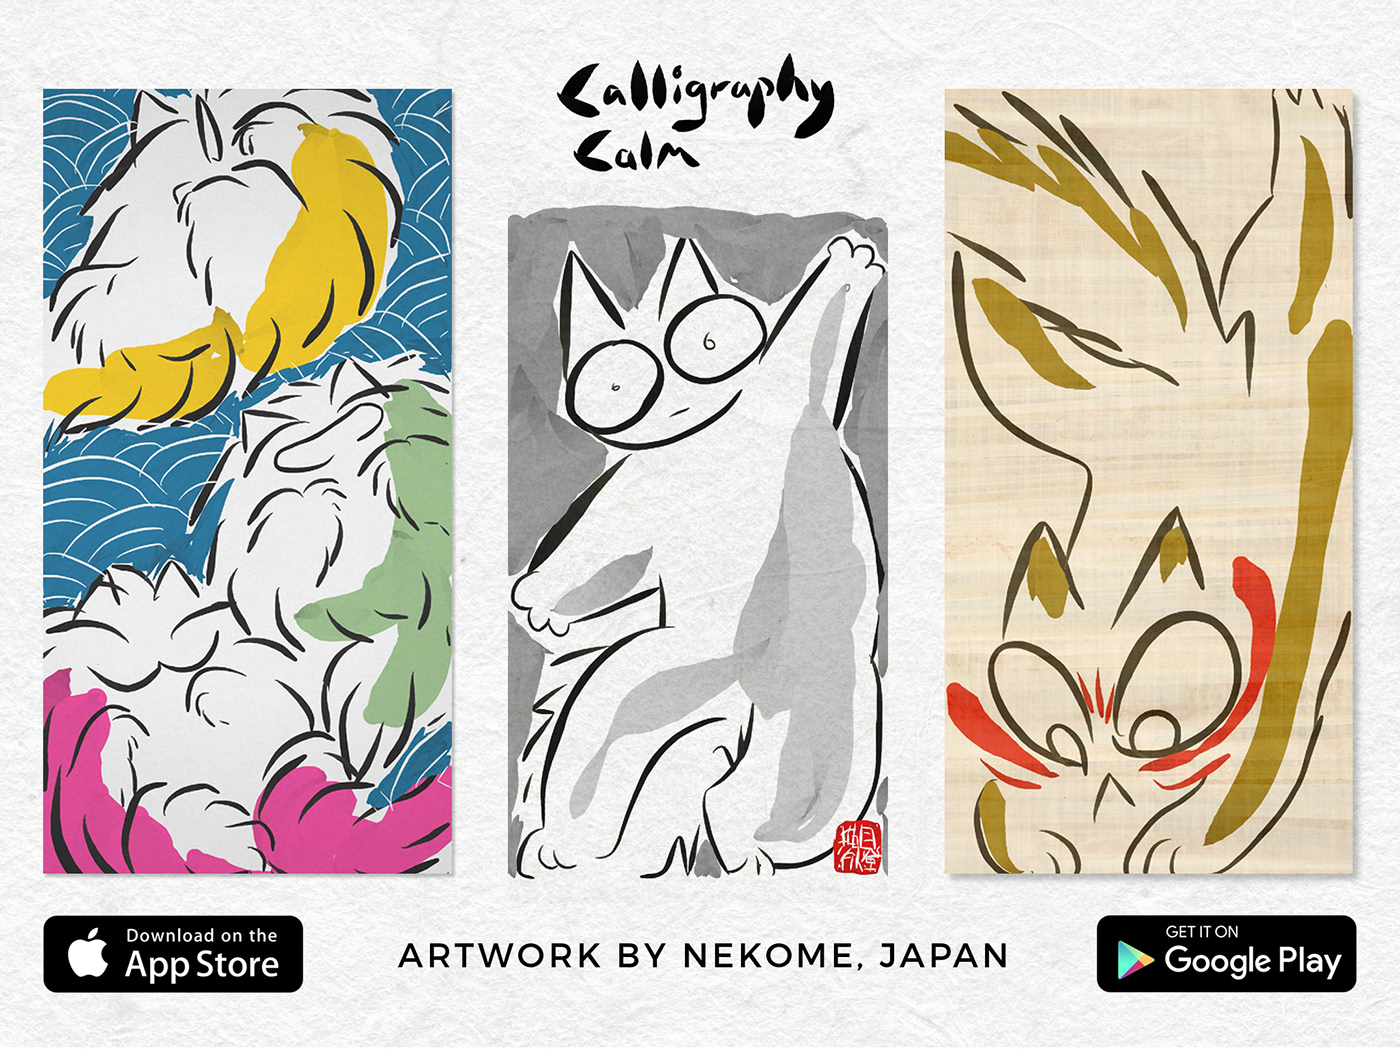 app Calligraphy   calm japan Japanese design chinese ink painting iphone iPad brushes painting app